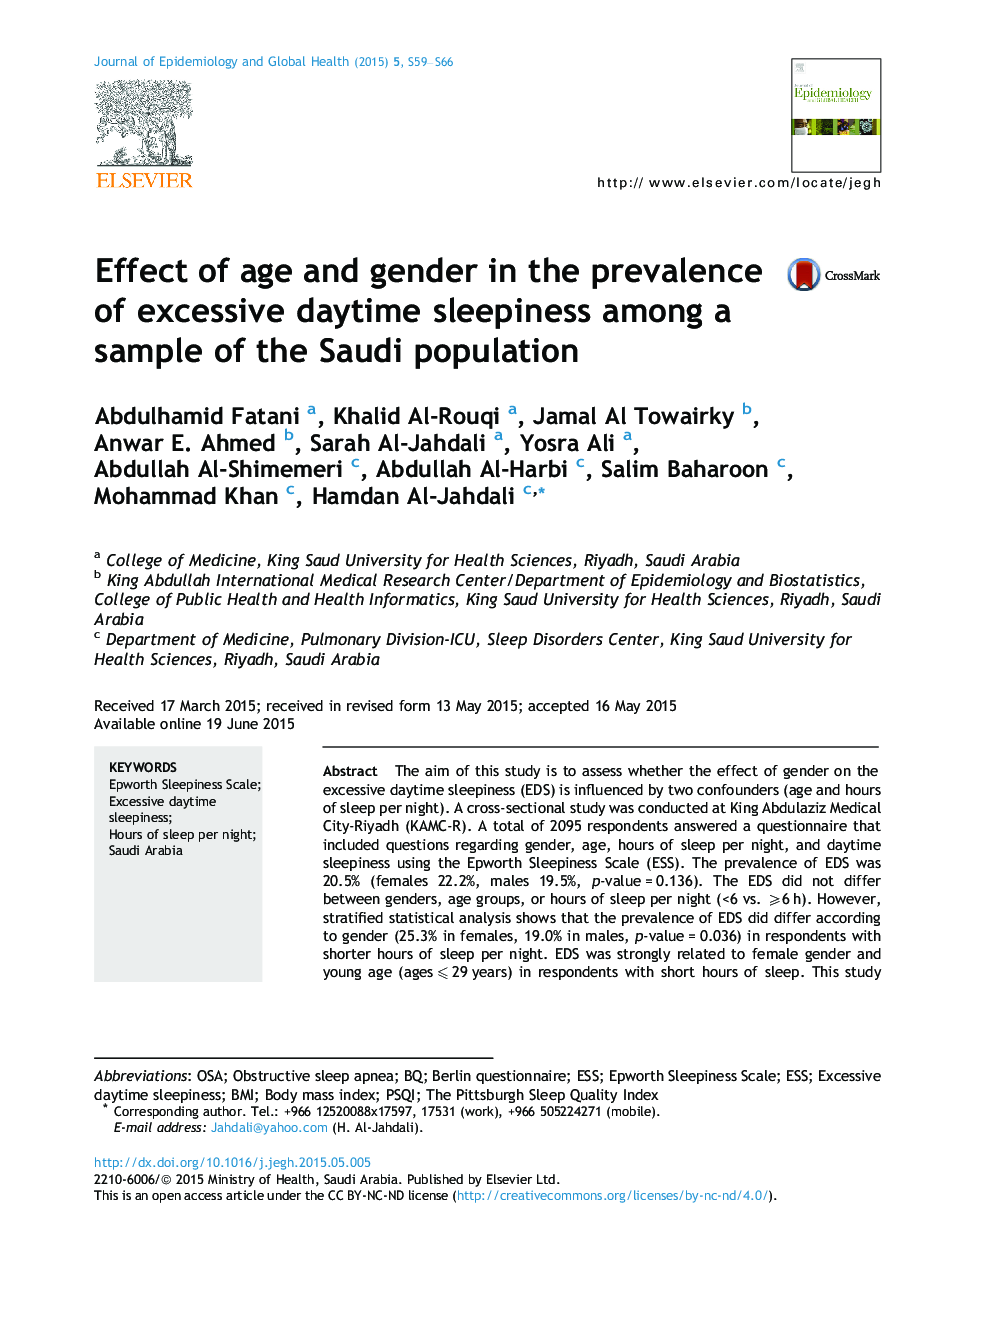 Effect of age and gender in the prevalence of excessive daytime sleepiness among a sample of the Saudi population